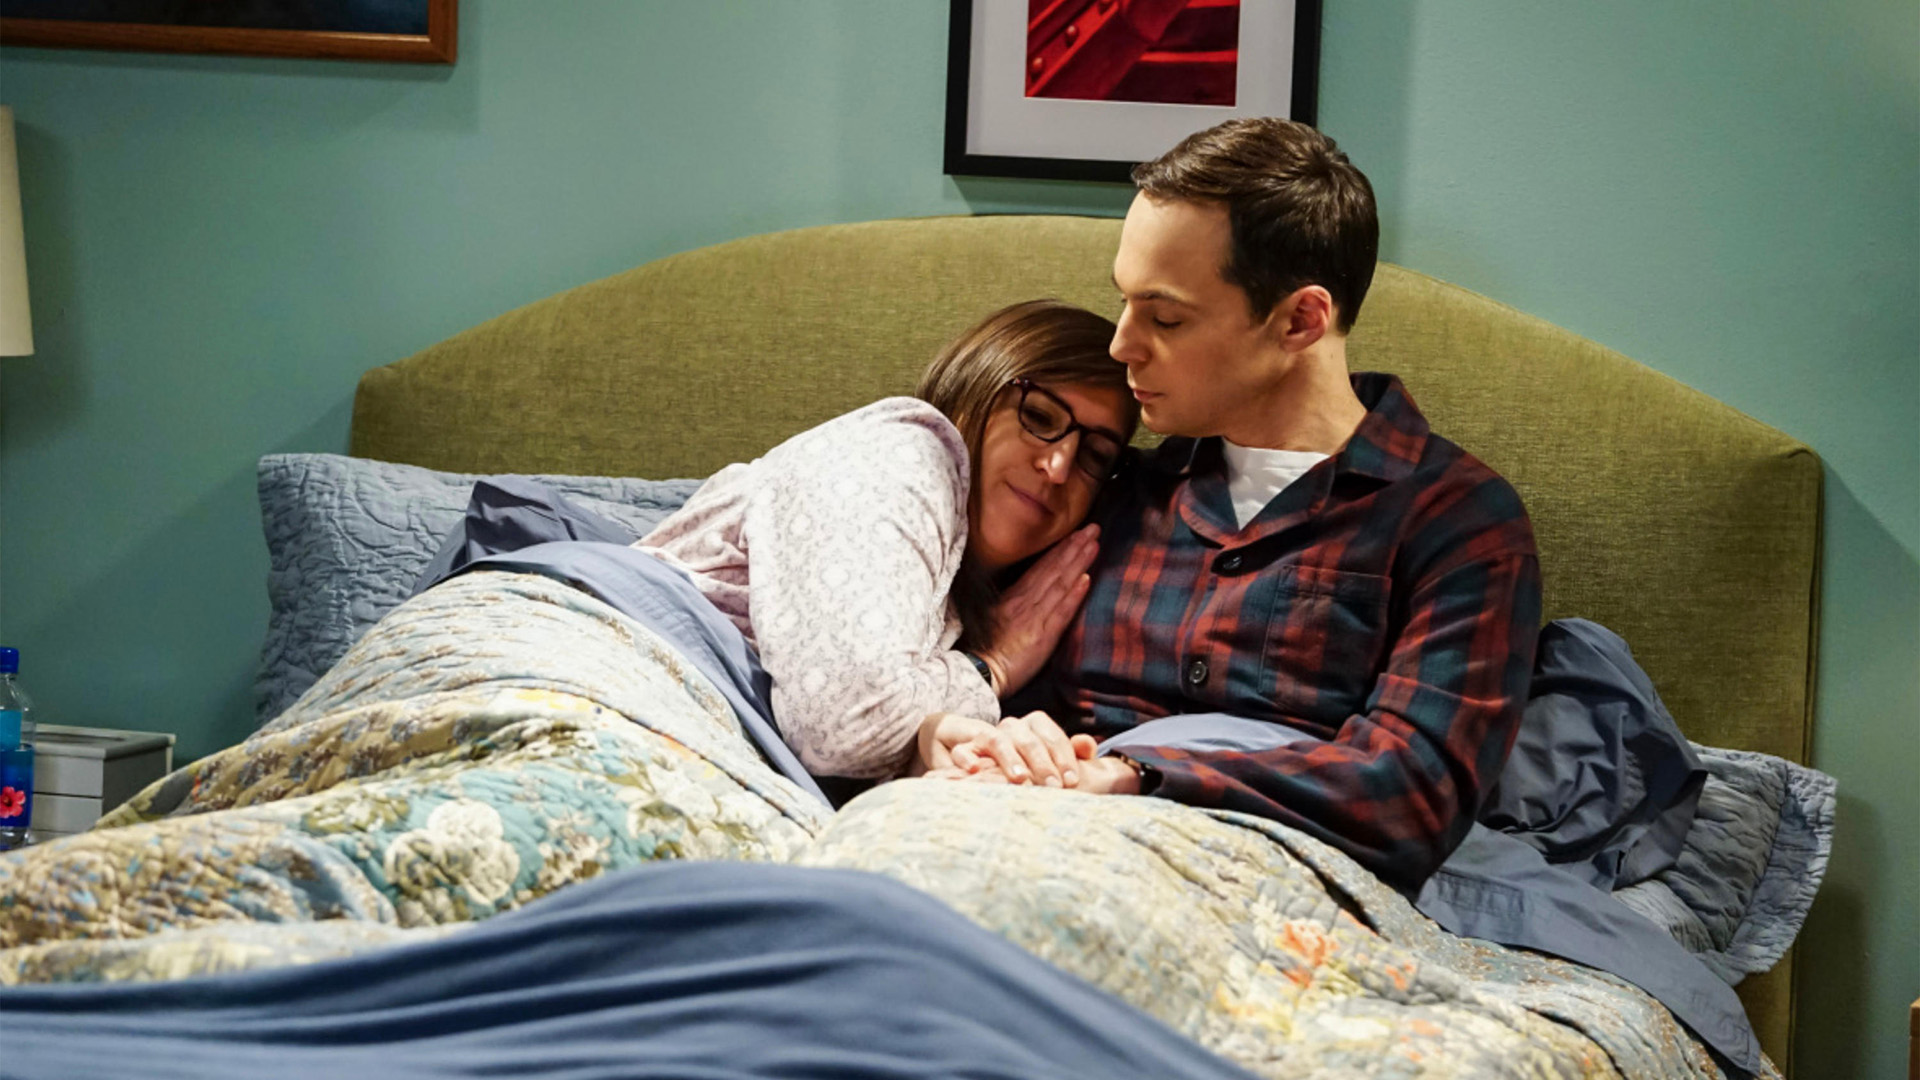 Sheldon and Amy's Intimate Scene Was a Surprise to Everyone, Even the Actors Themselves